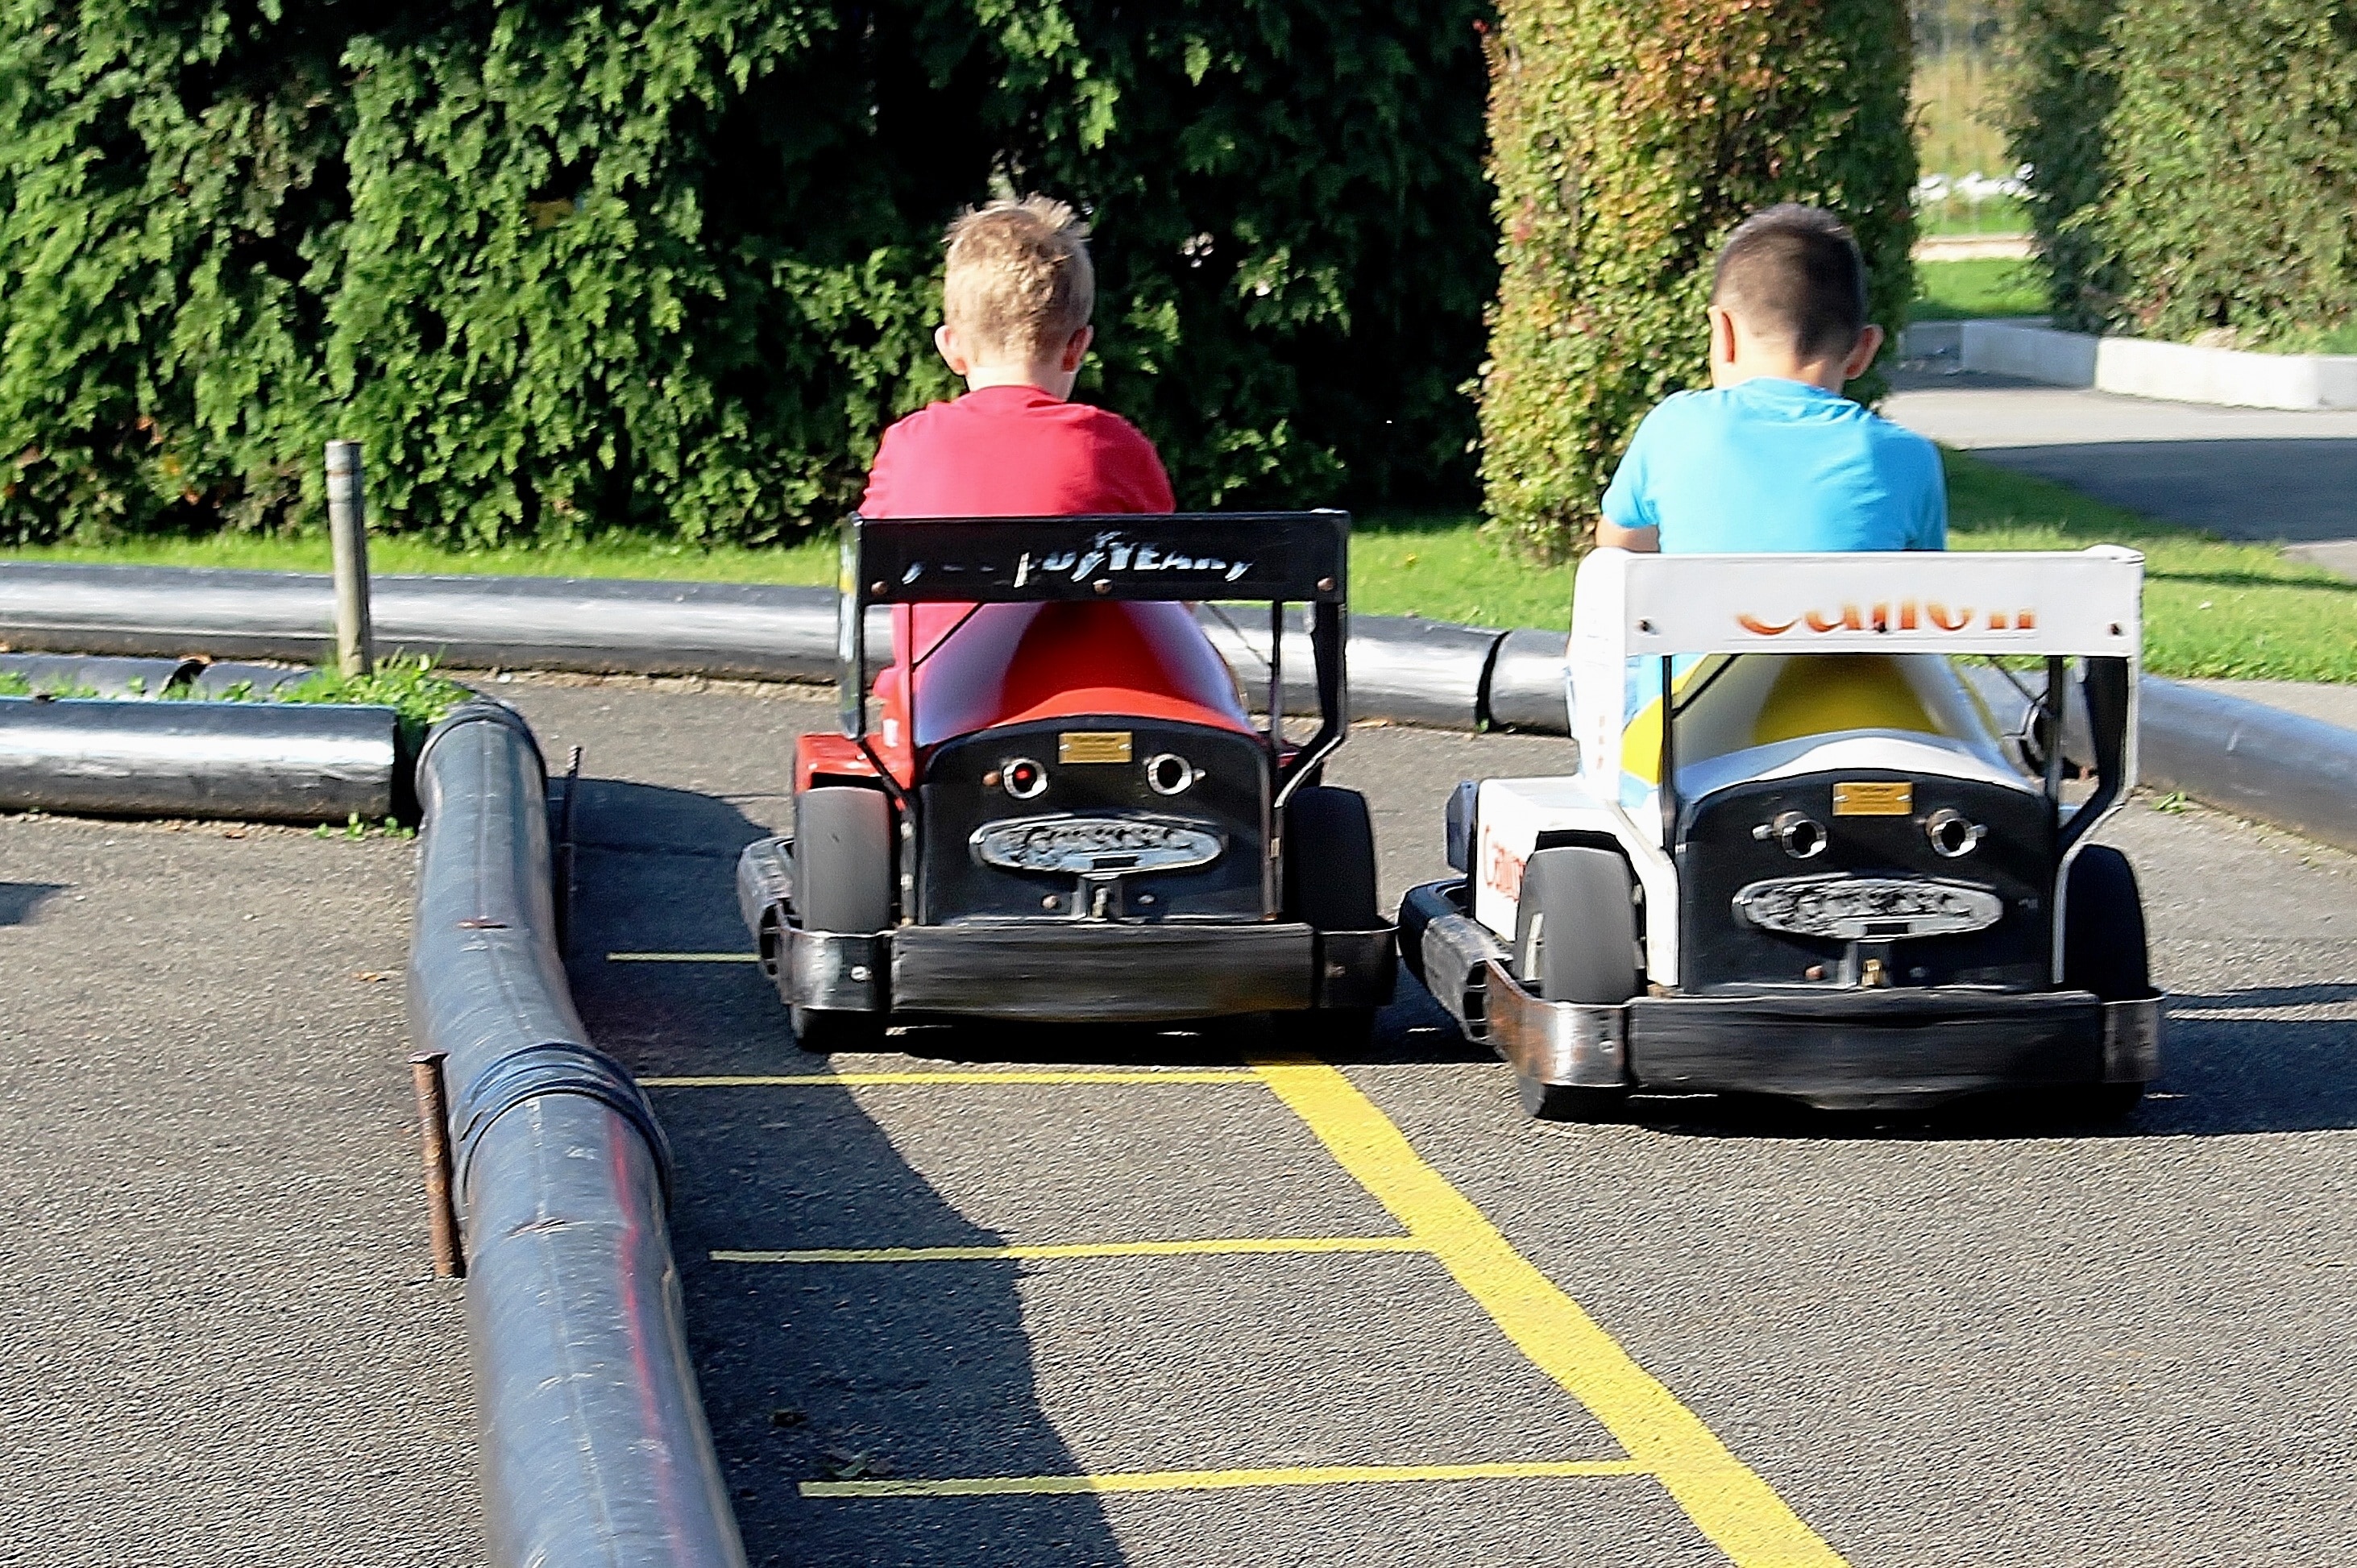 Two Boy's Playing Go Kart - Top Gear Karting , HD Wallpaper & Backgrounds